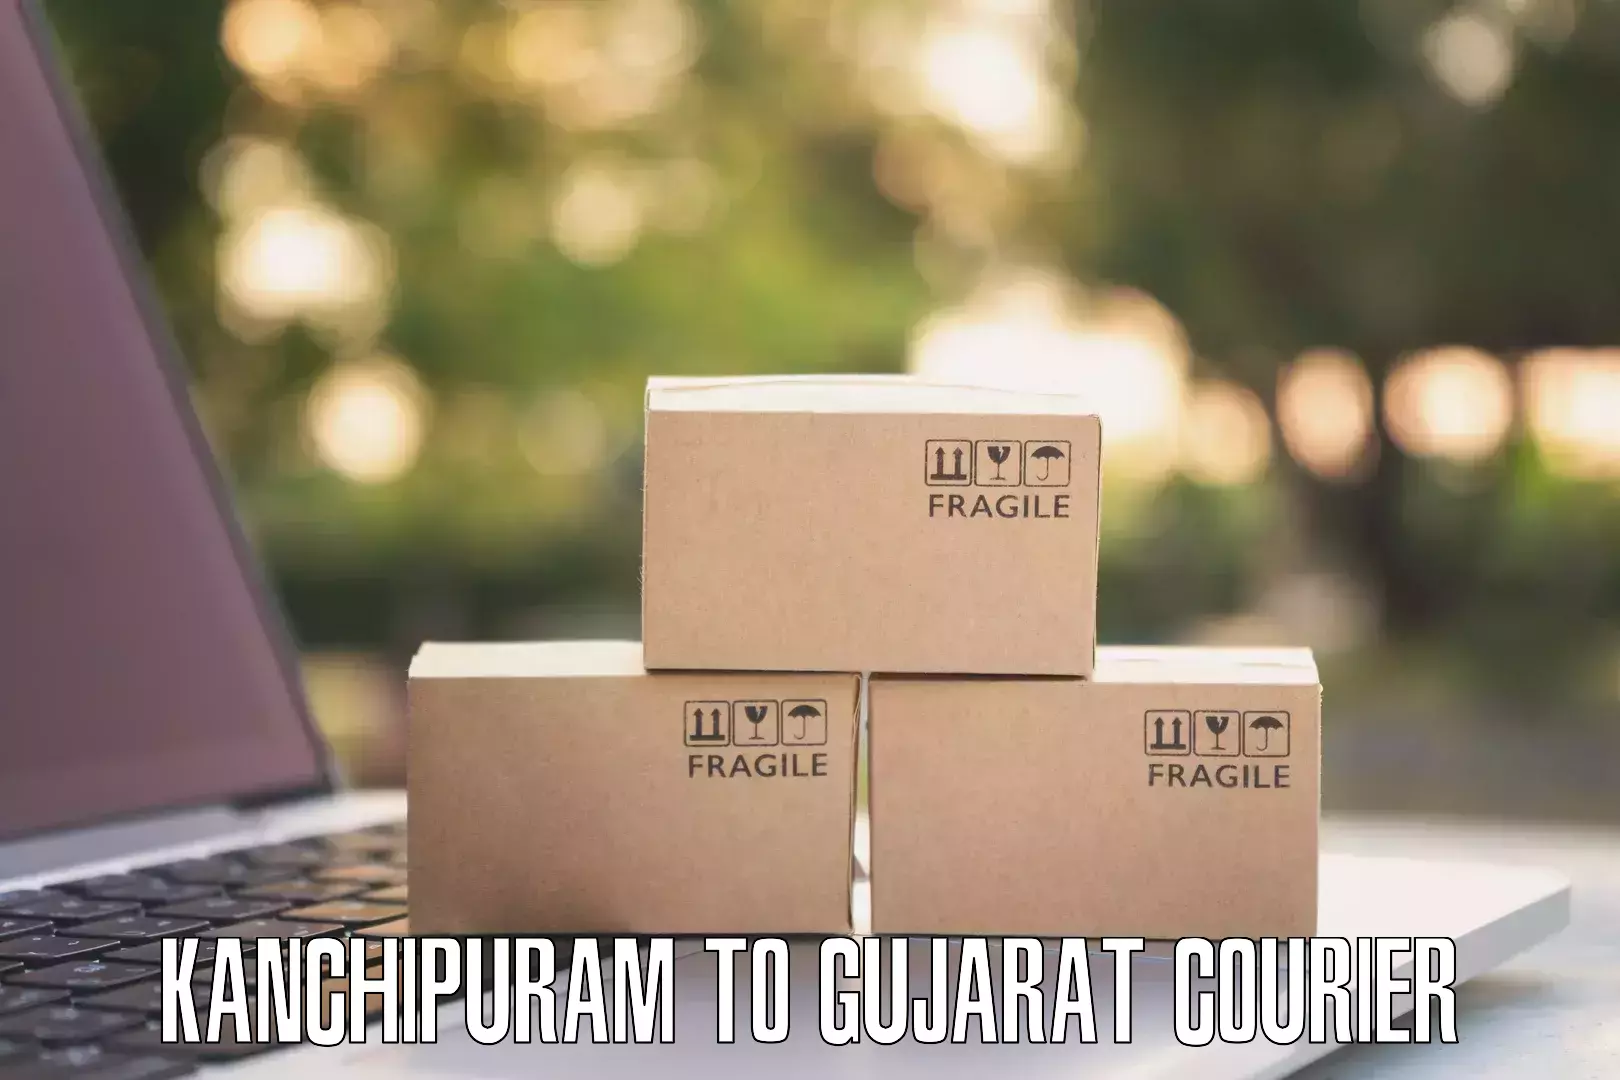 Easy access courier services Kanchipuram to Gujarat